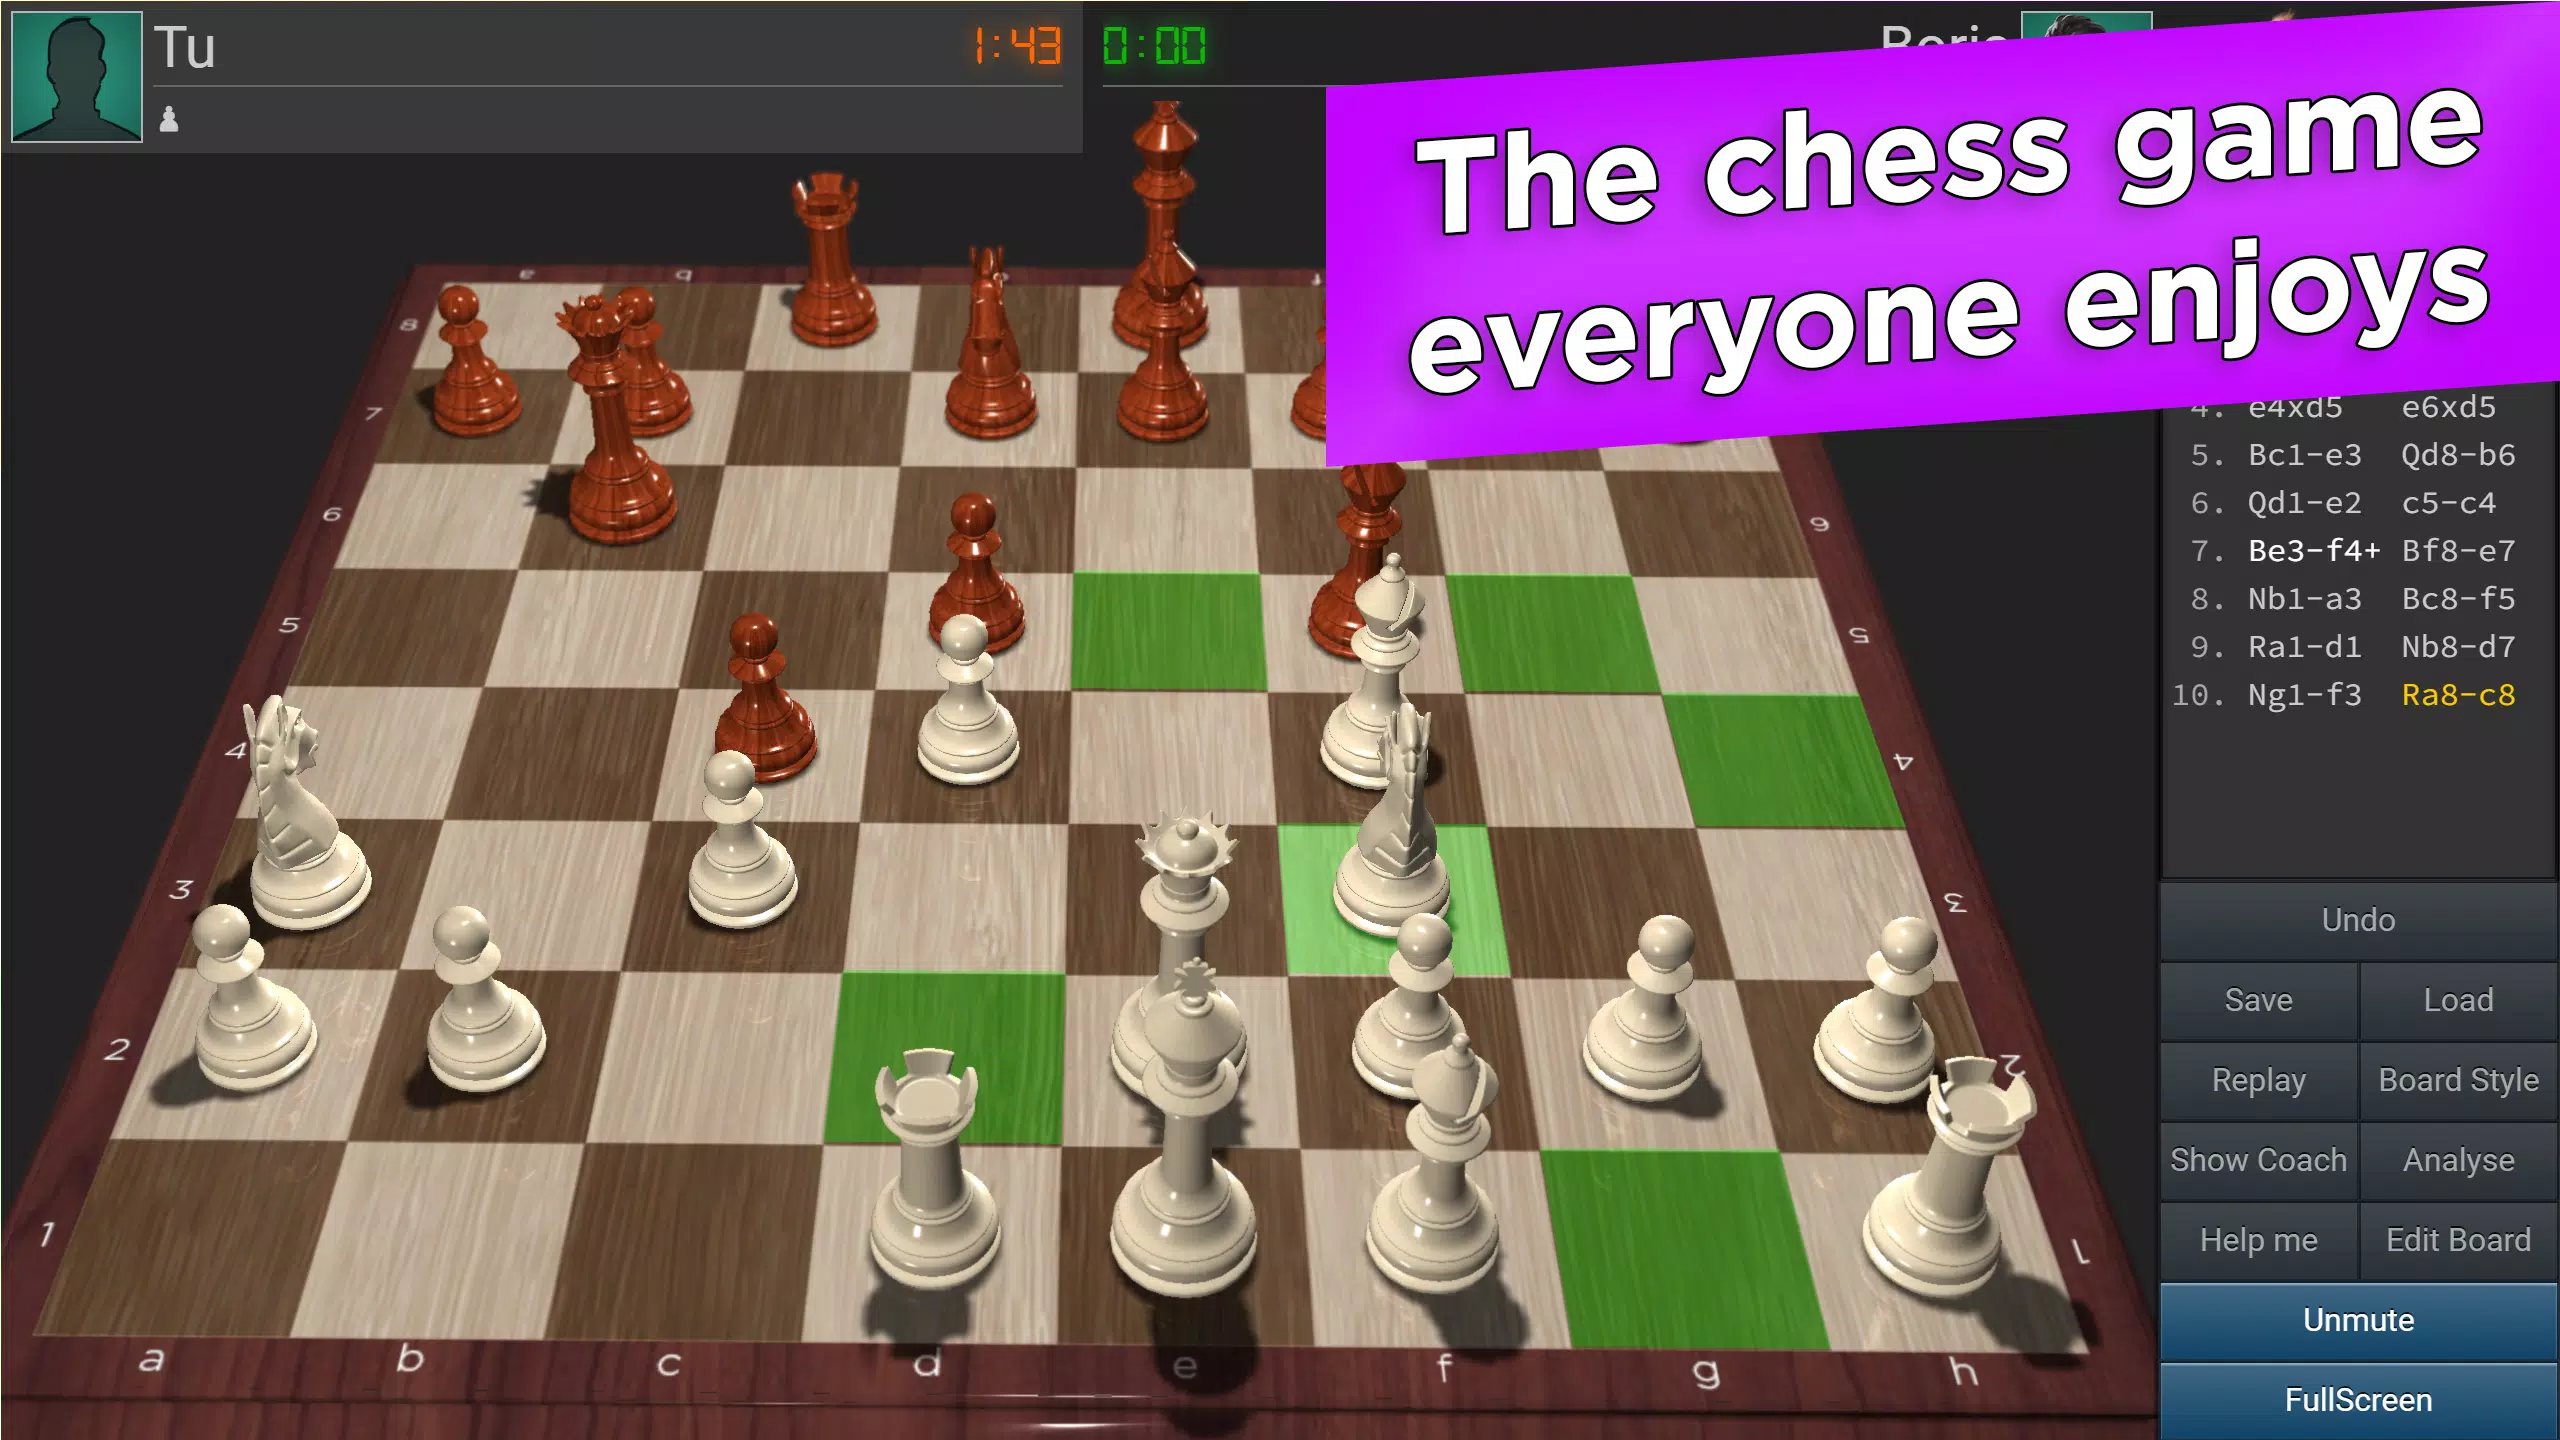 SparkChess Pro 15.0.0 Apk for Android - Apkses